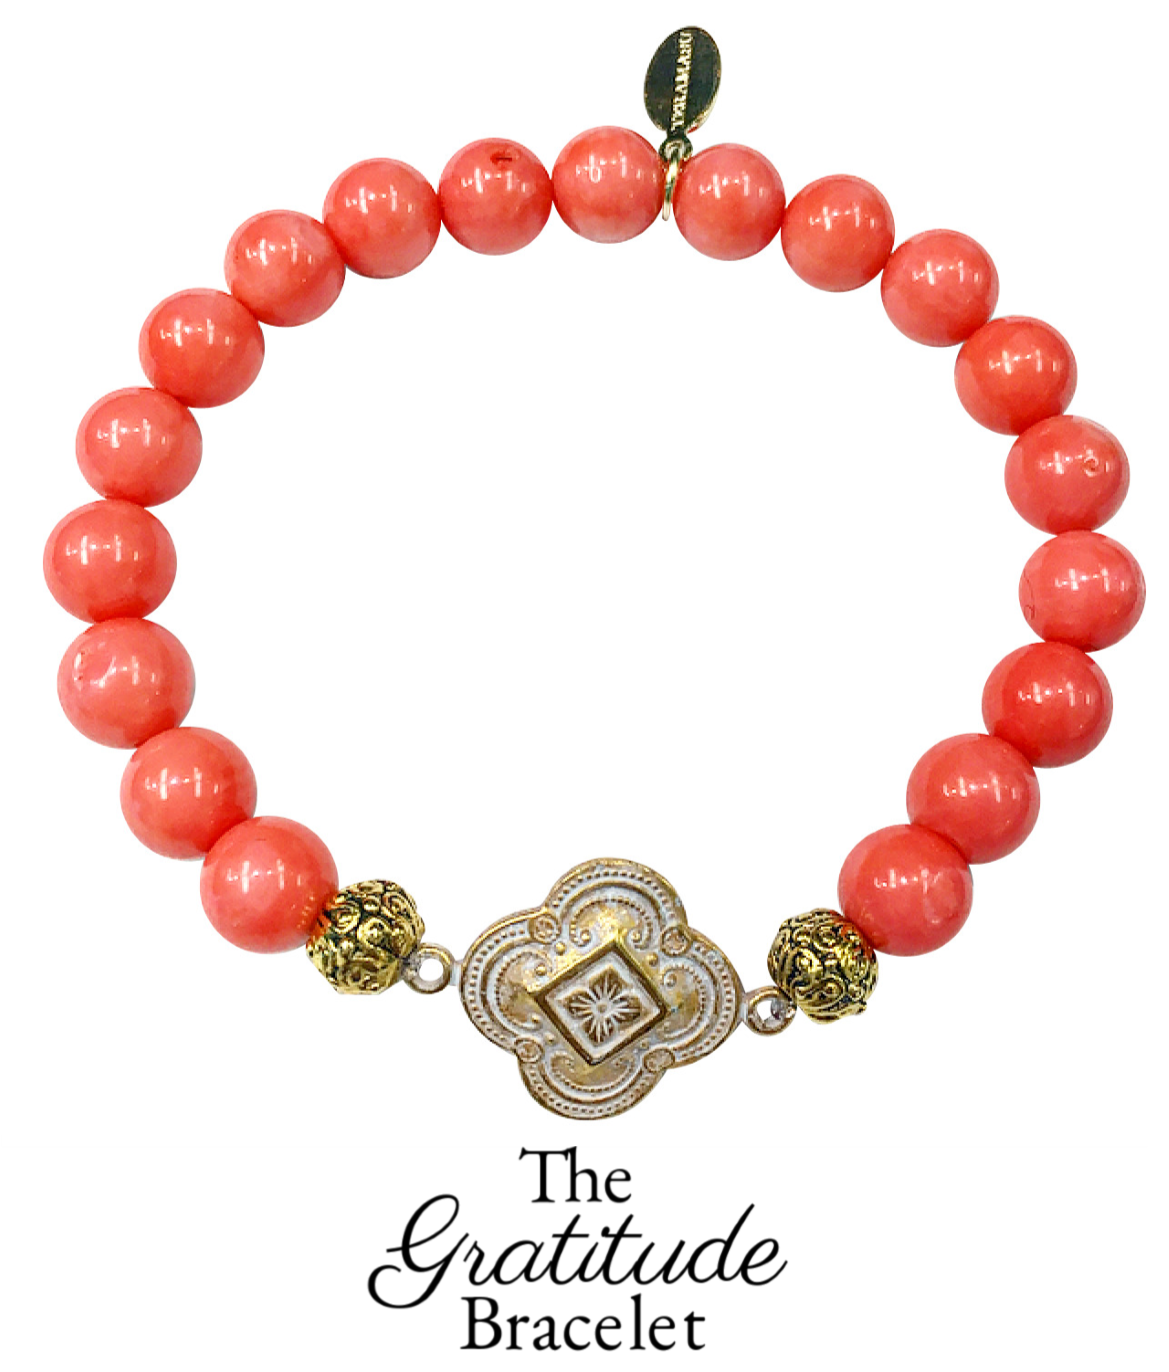 "Want It" Wednesday: Add a Spark of Meaning and Color to Your New Year Style with Our New Teramasu Gratitude Bracelet in Pink Coral Gemstone